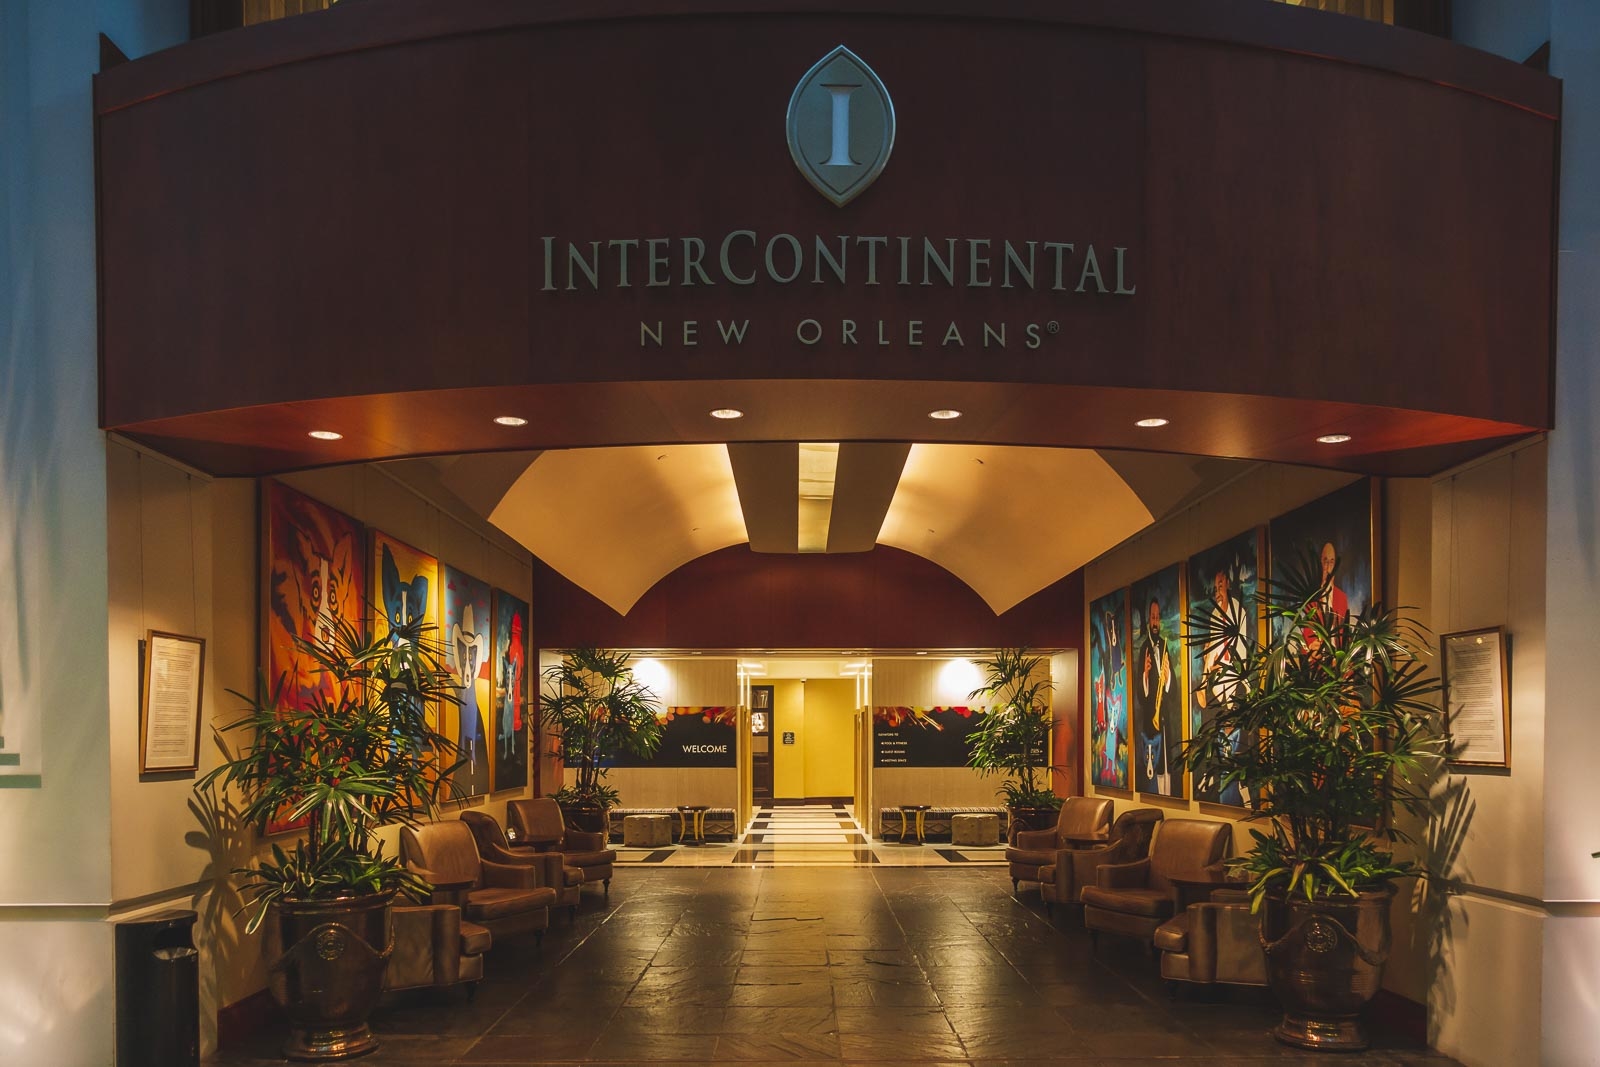 things to do in new orleans - stay at Intercontinental Hotel